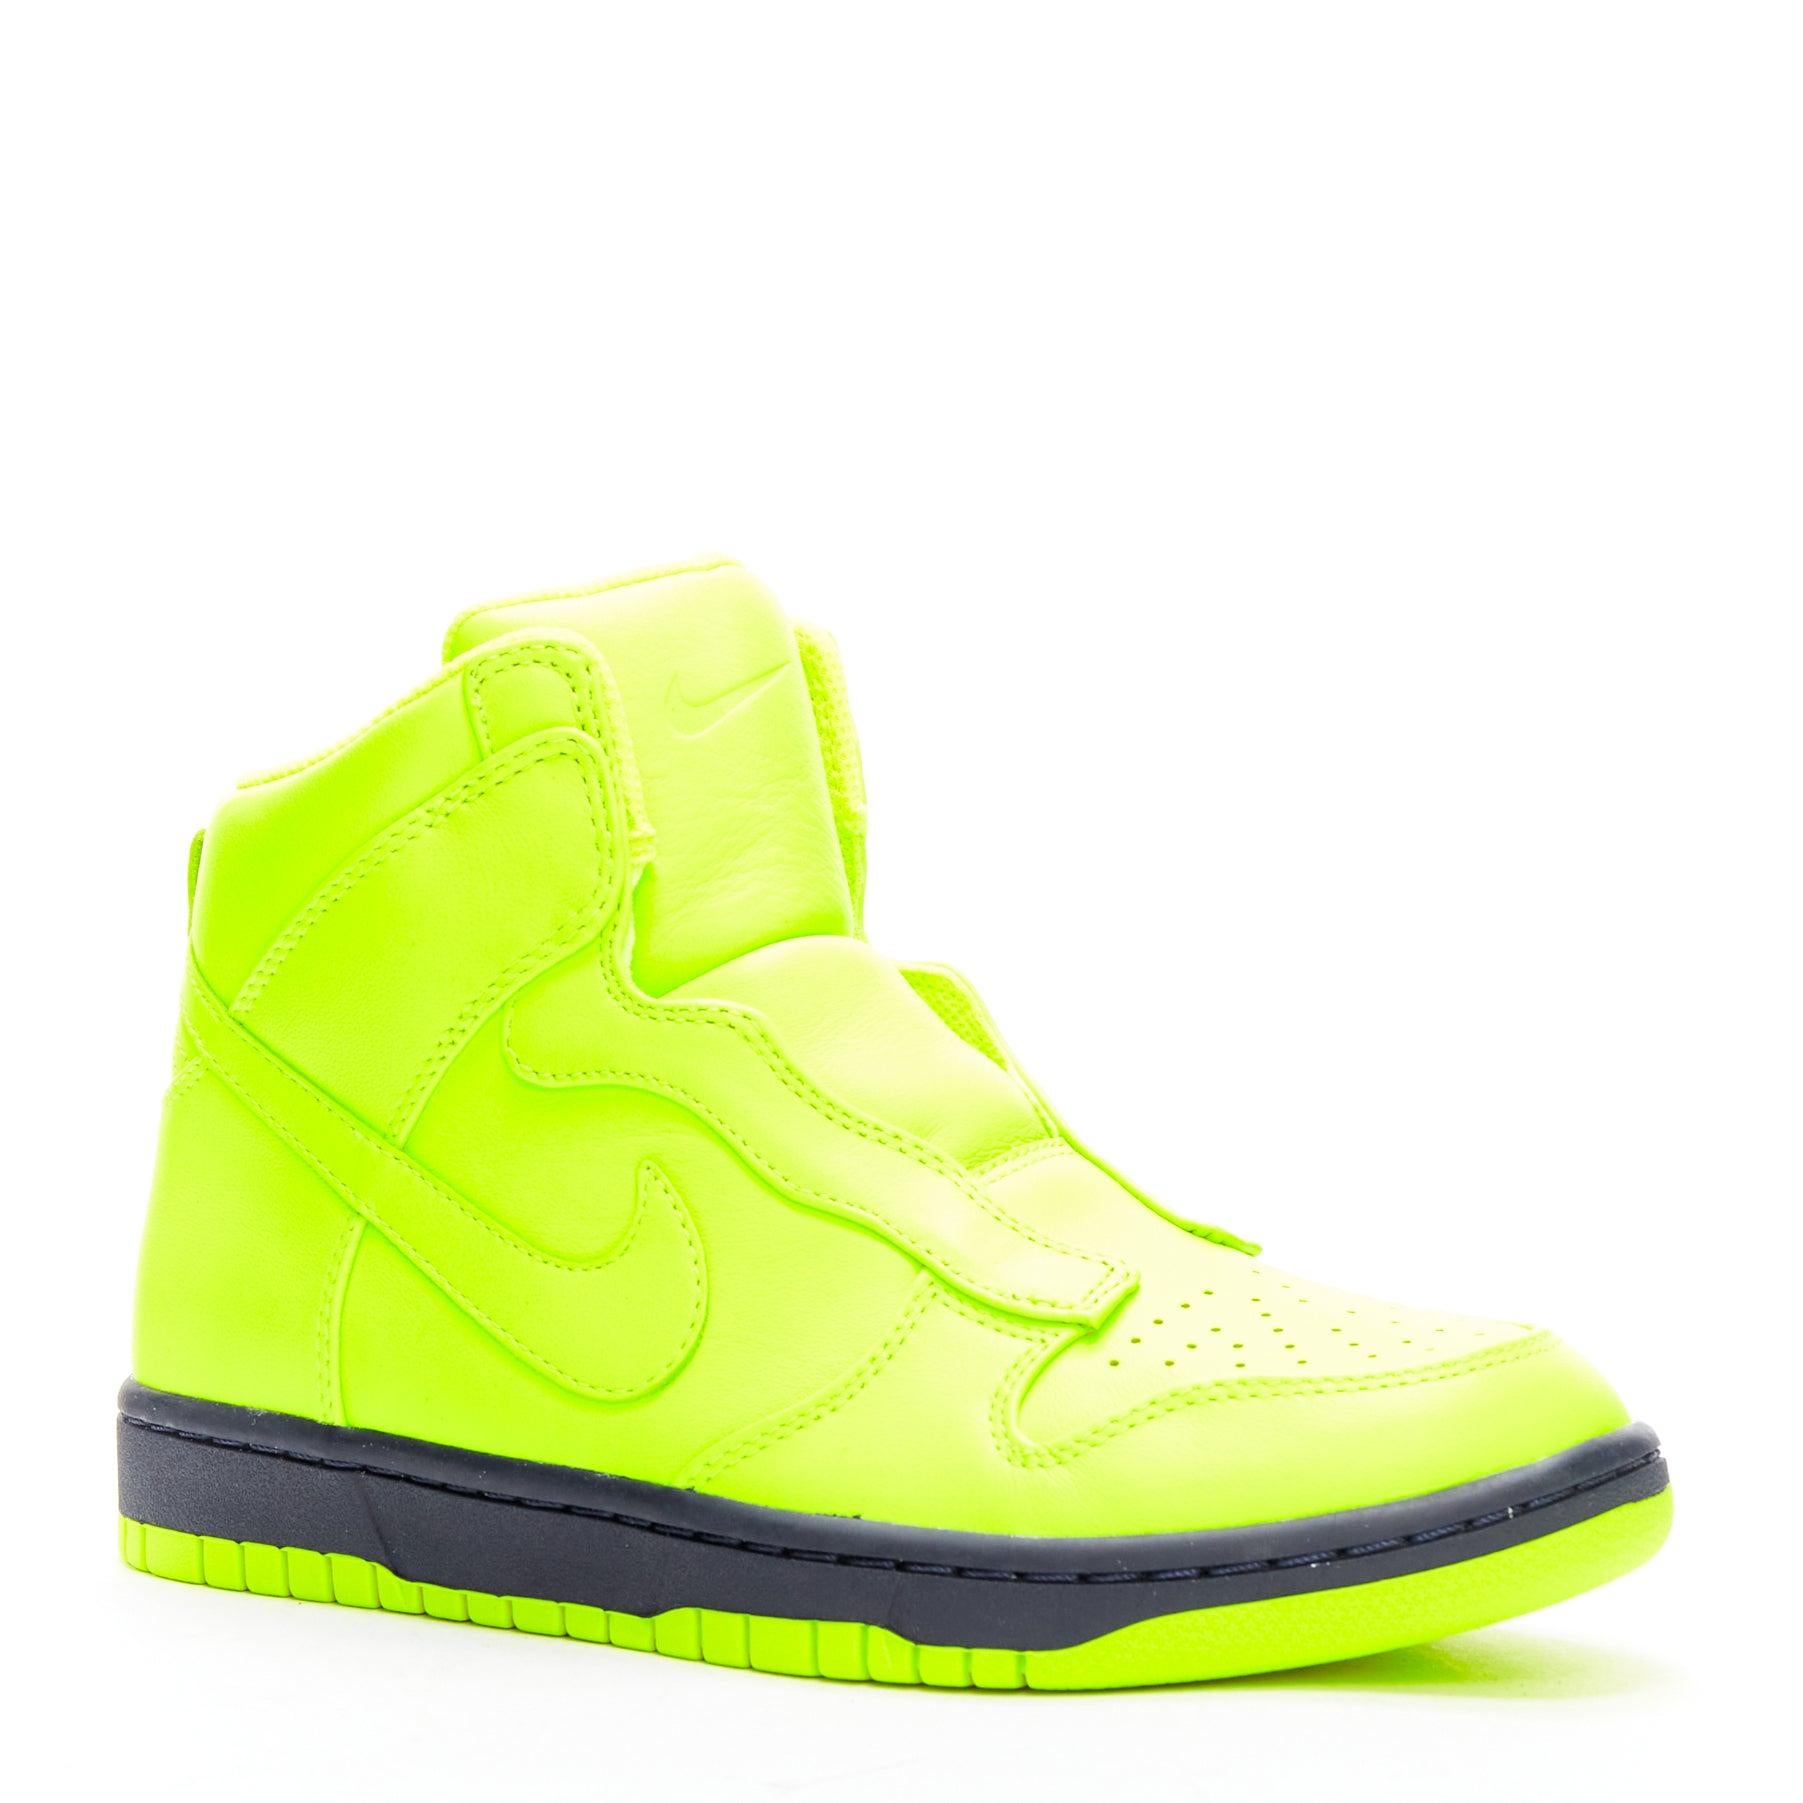 SACAI NIKE NIKELAB Dunk Lux SP Volt neon yellow high top sneakers US8 EU38
Reference: BSHW/A00162
Brand: Nike
Model: Dunk Lux SP Volt Obsidian
Collection: Sacai
Material: Leather
Color: Neon Yellow, Black
Pattern: Solid
Closure: Slip On
Lining: Neon